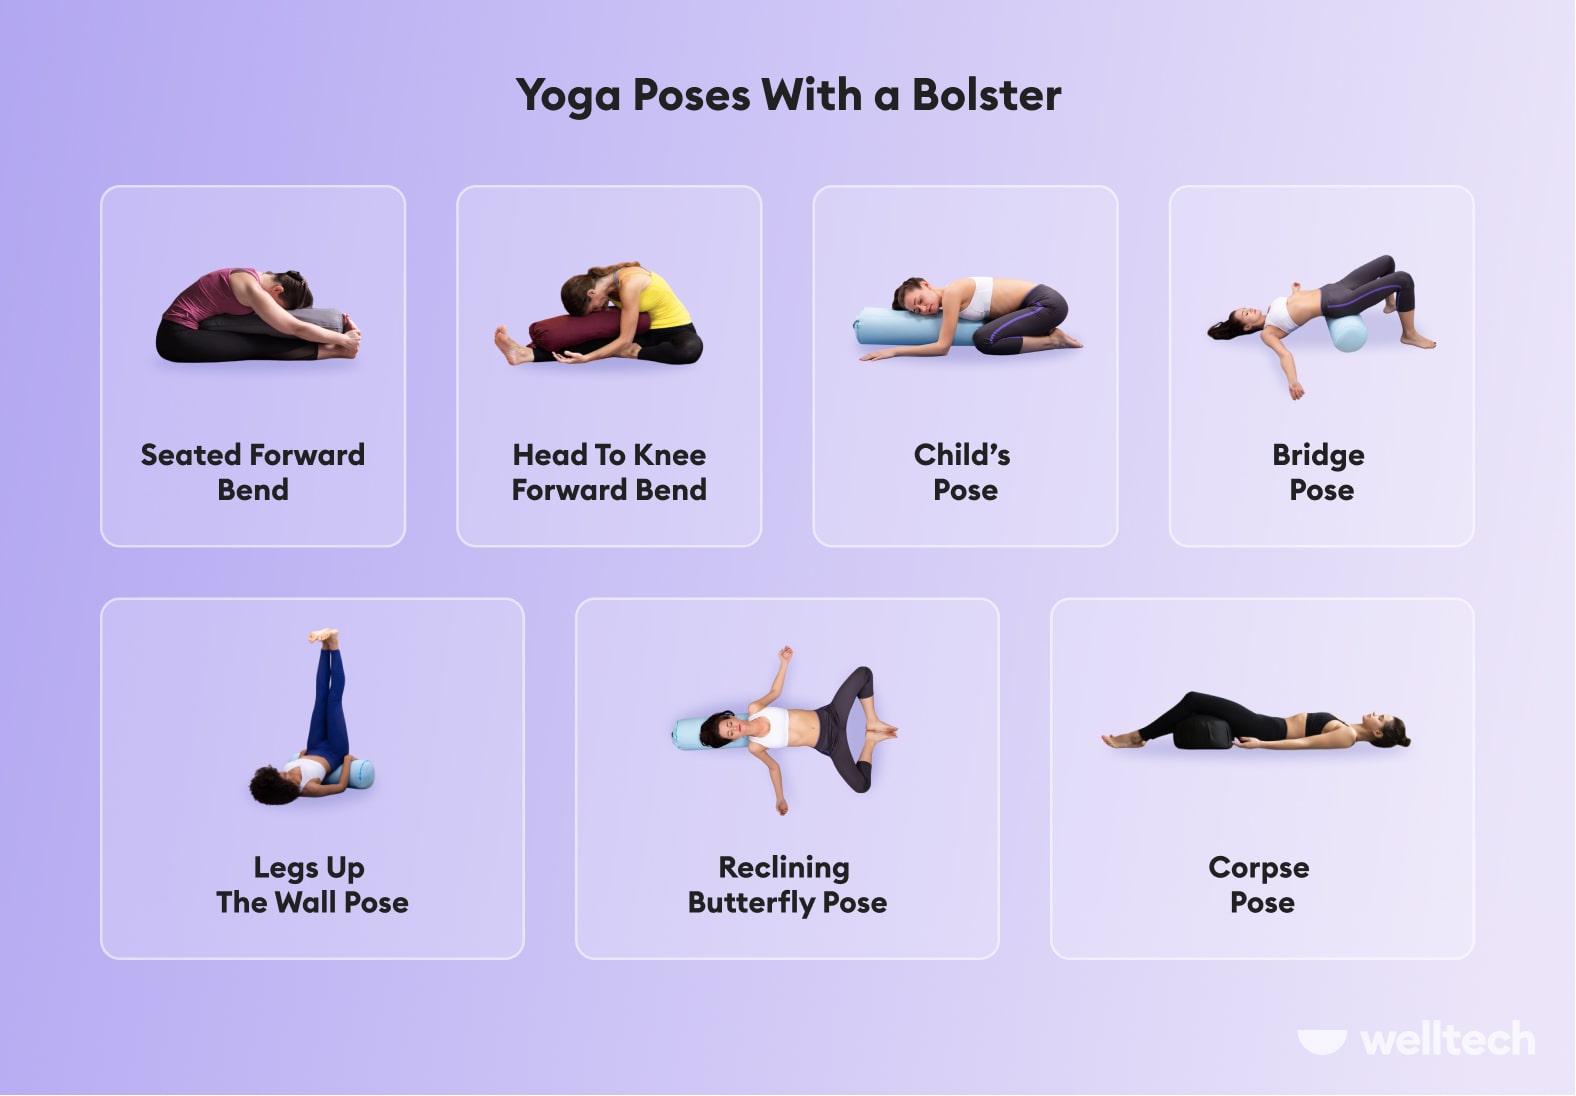 10 Beest Ways To Use A Yoga Bolster (with pictures) #yin #yoga